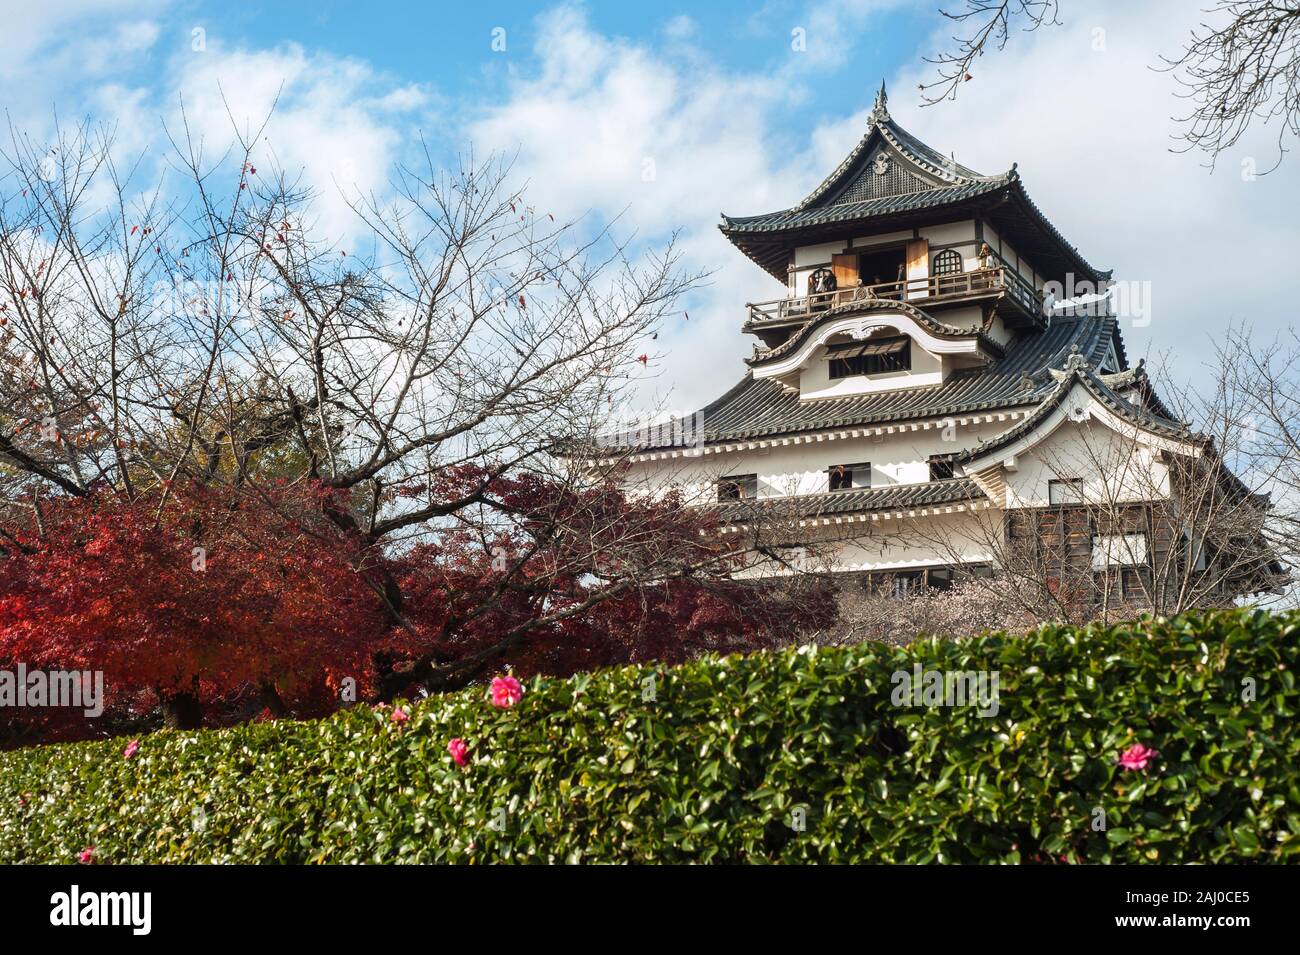 INUYAMA, JAPAN - NOV 24, 2016 - Autumn at Inuyama Castle, Aichi Prefecture, Japan. Inuyama is one of only twelve original castles in Japan. Stock Photo